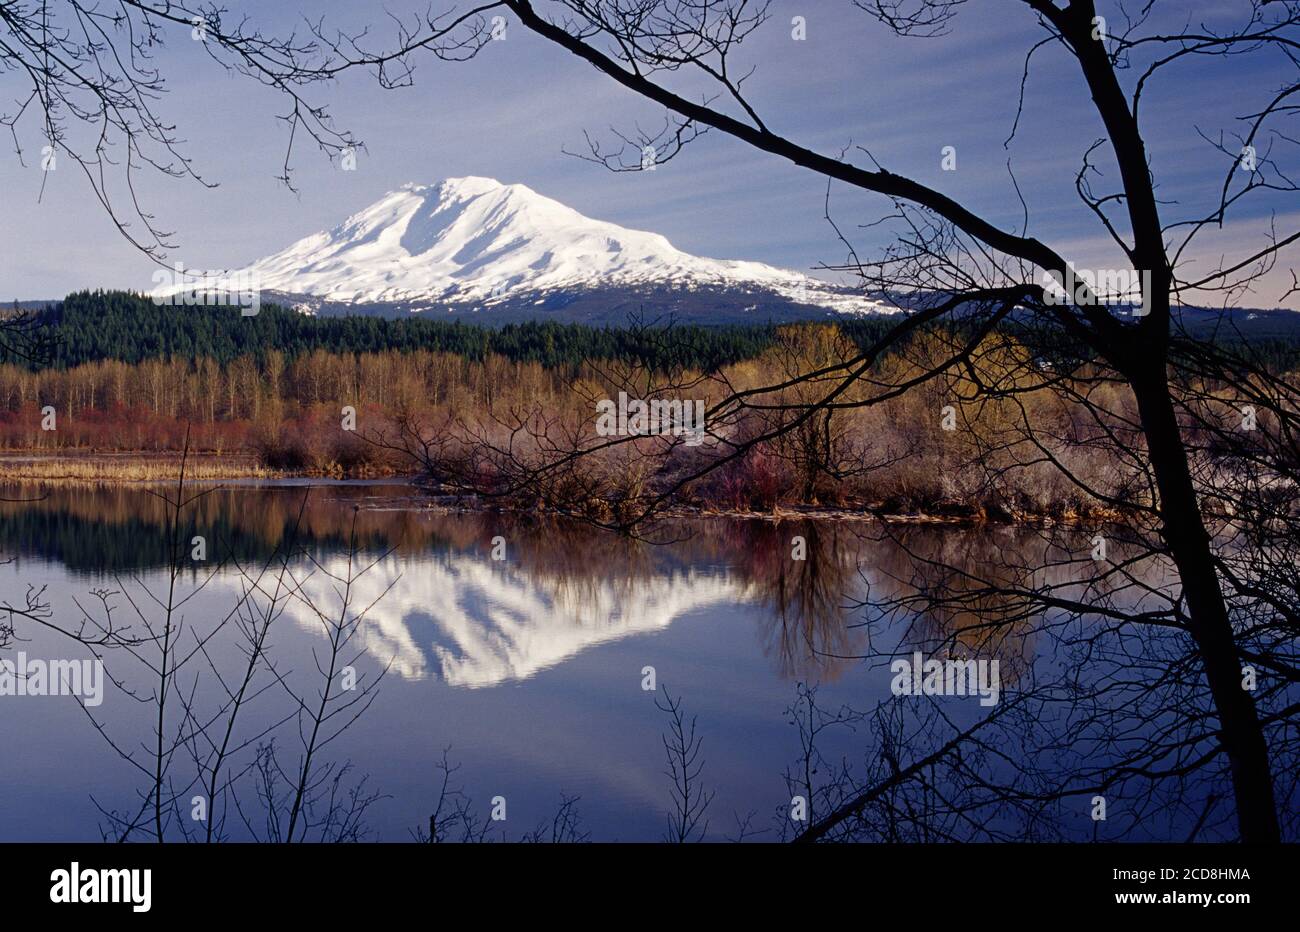 Sno-Parks and Cabin Fever in Mt. Adams & Trout Lake, Washington